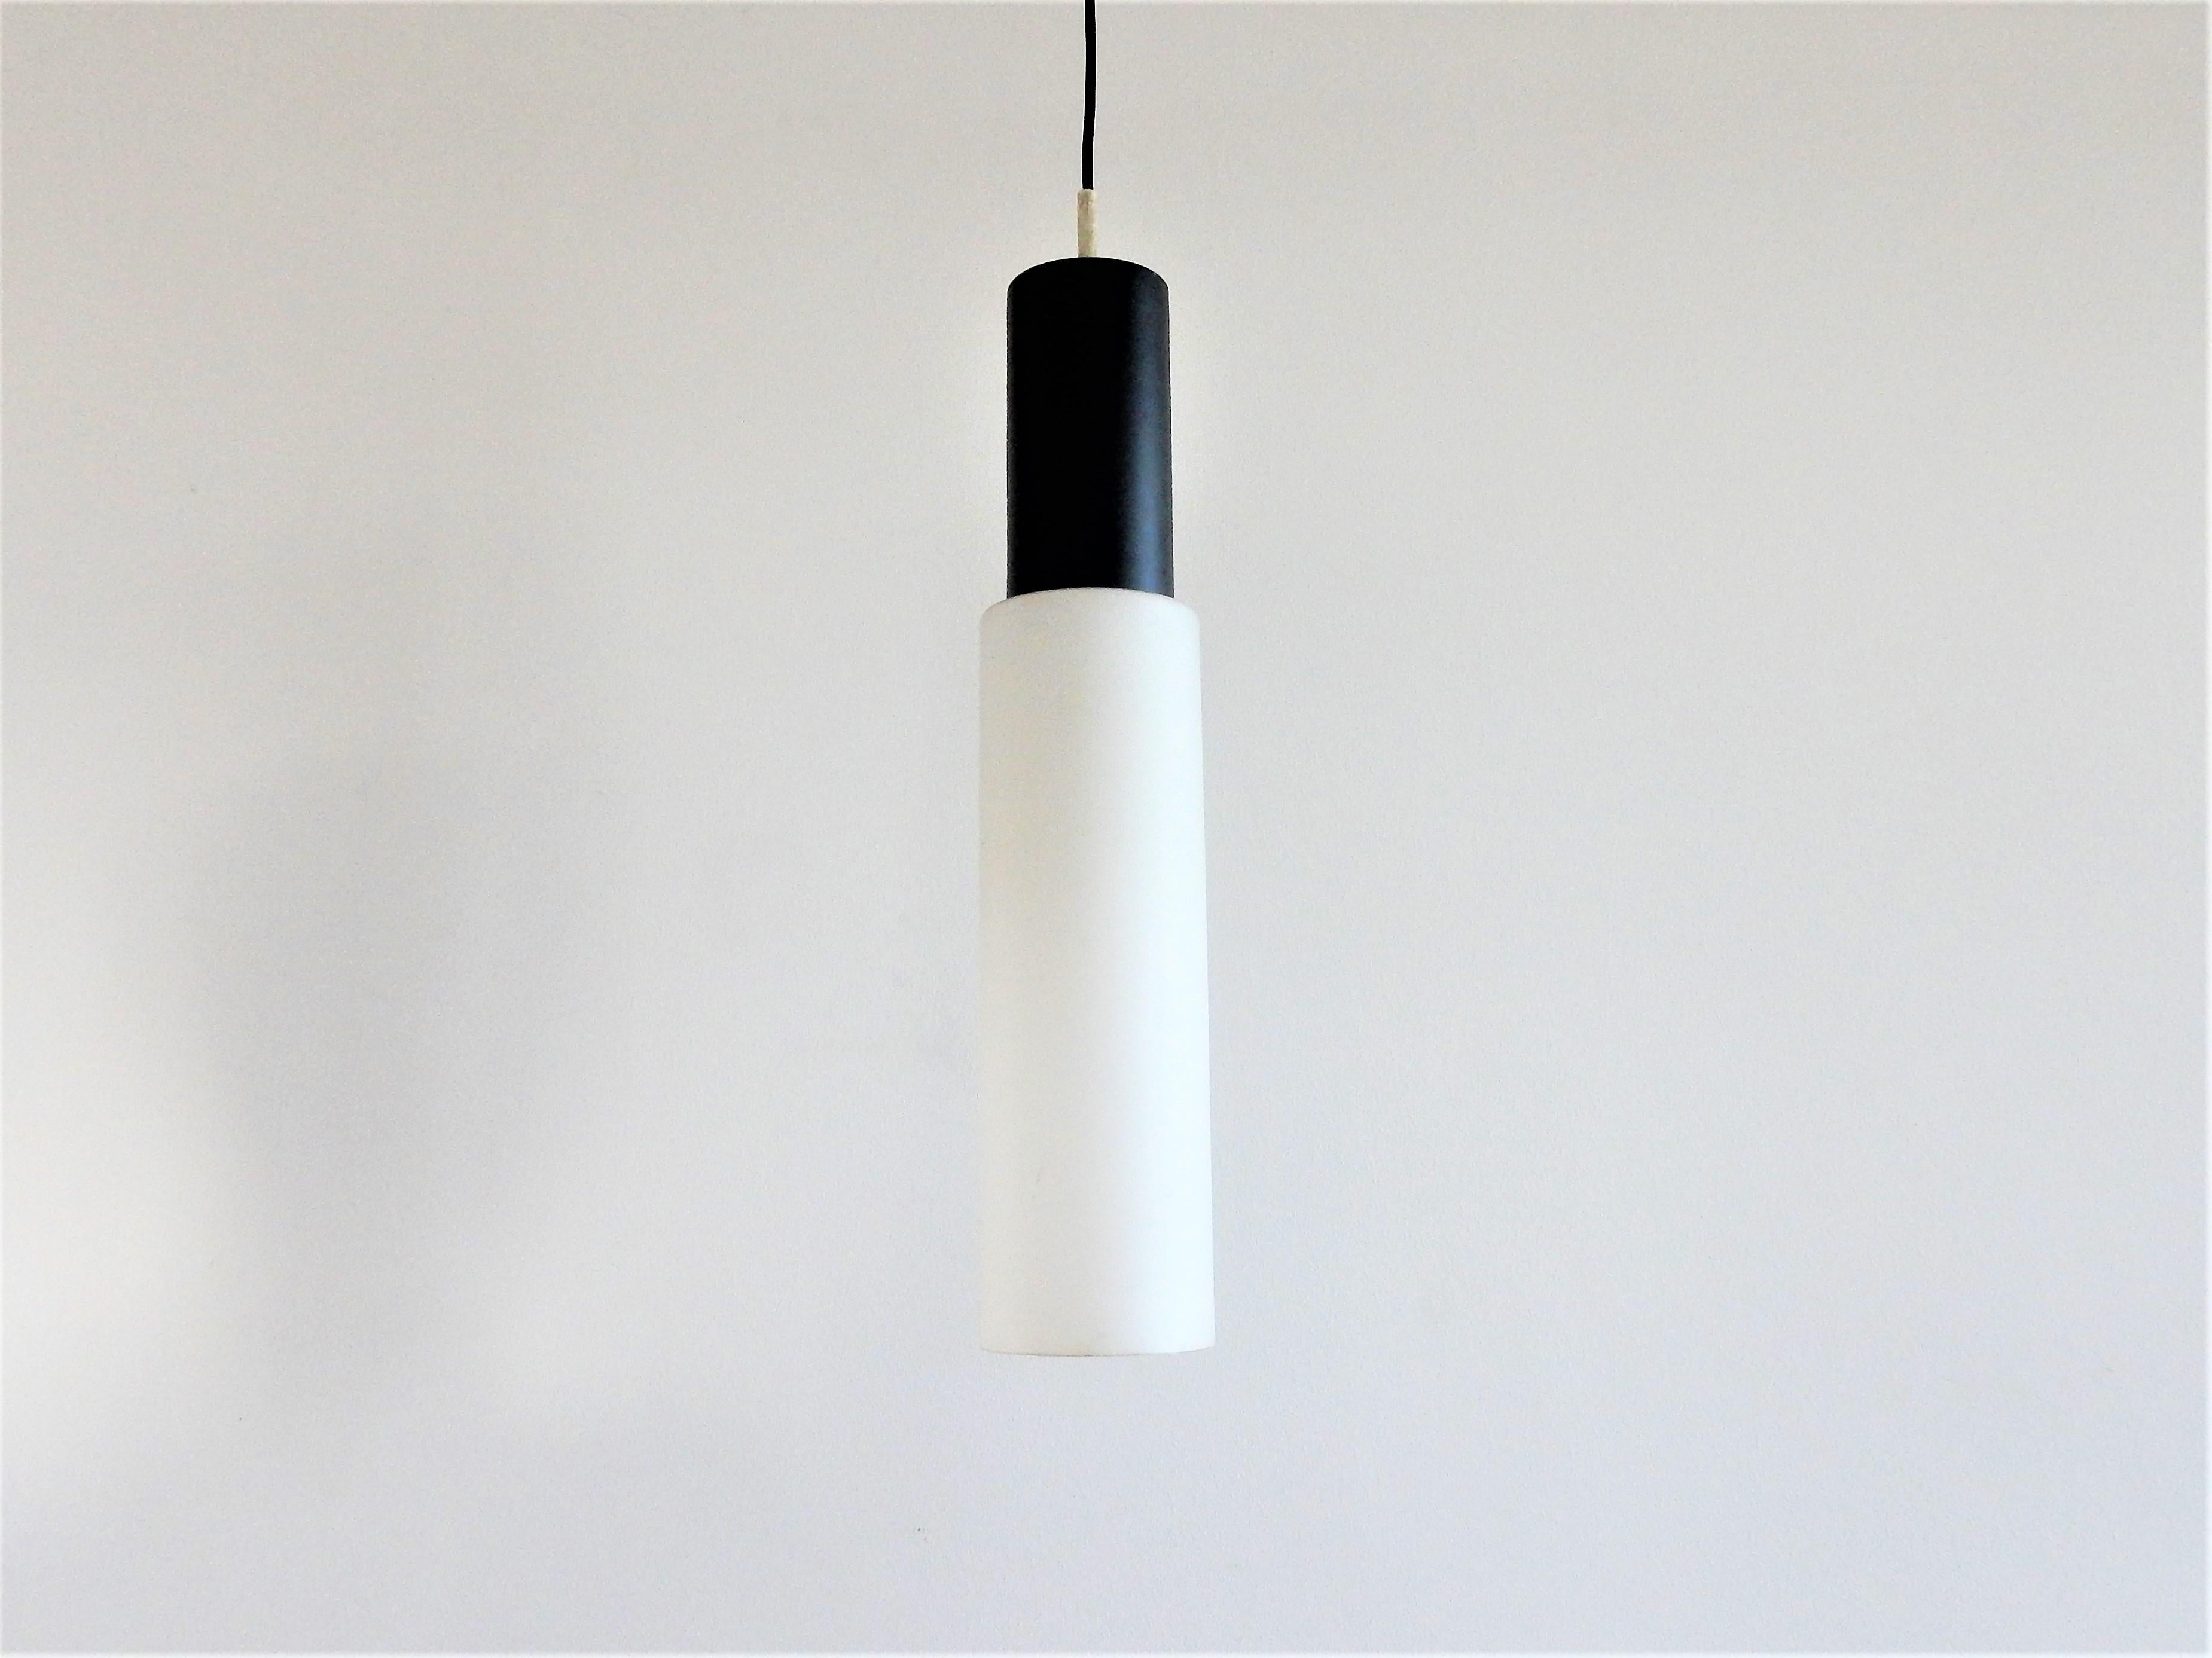 This stunning pendant lamp, model 238, is made by the Dutch company Evenblij in the 1960s. It is made of a frosted black metal top with a white opaline glass cylinder. These lamps are in a very good condition with some smaller signs of age and